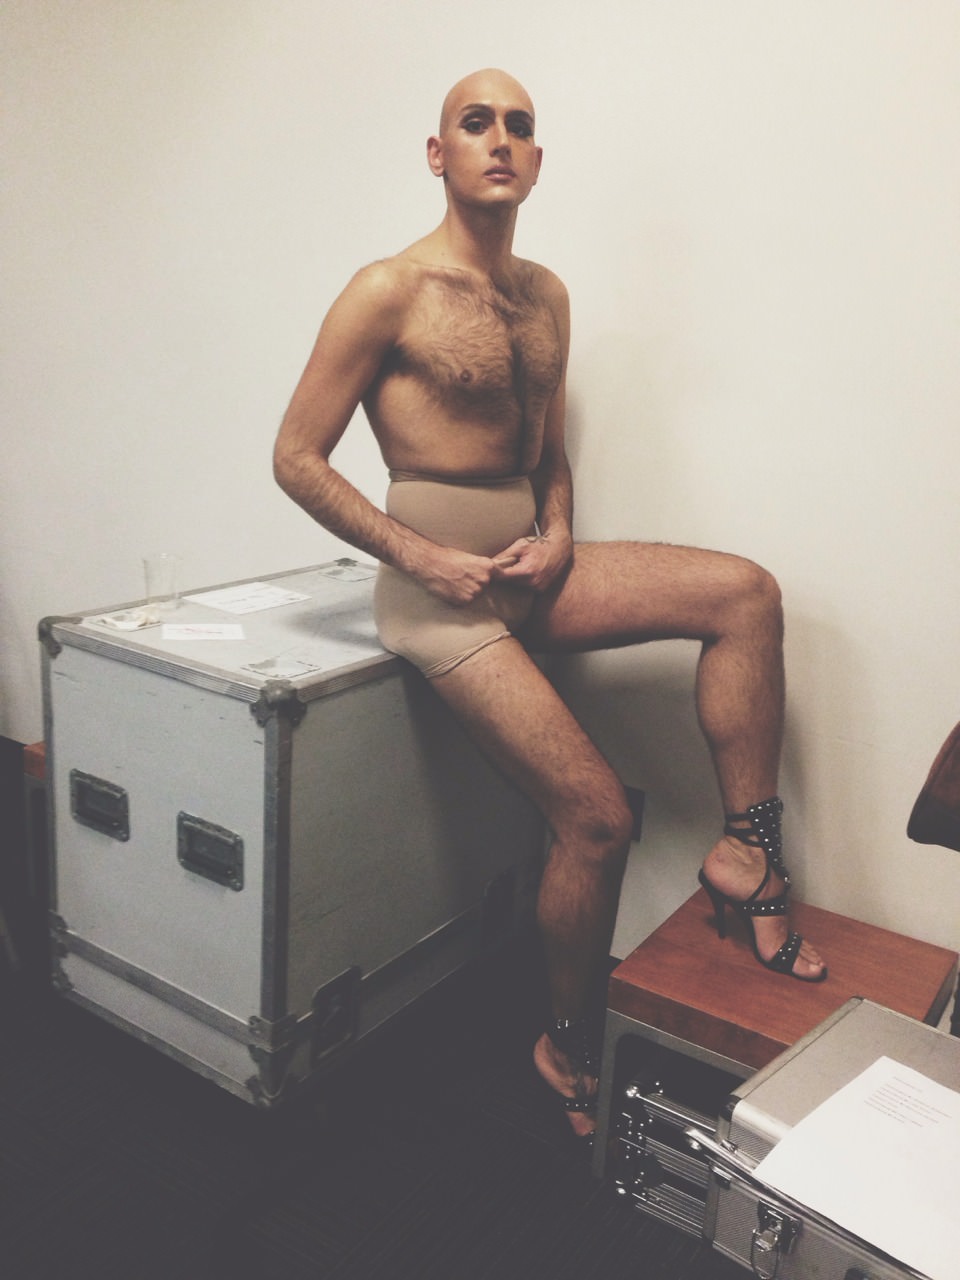 THE UNCENSORED VISUAL AUTOBIOGRAPHY OF BENJAMIN ACKERMANN_10_GAYLETTER